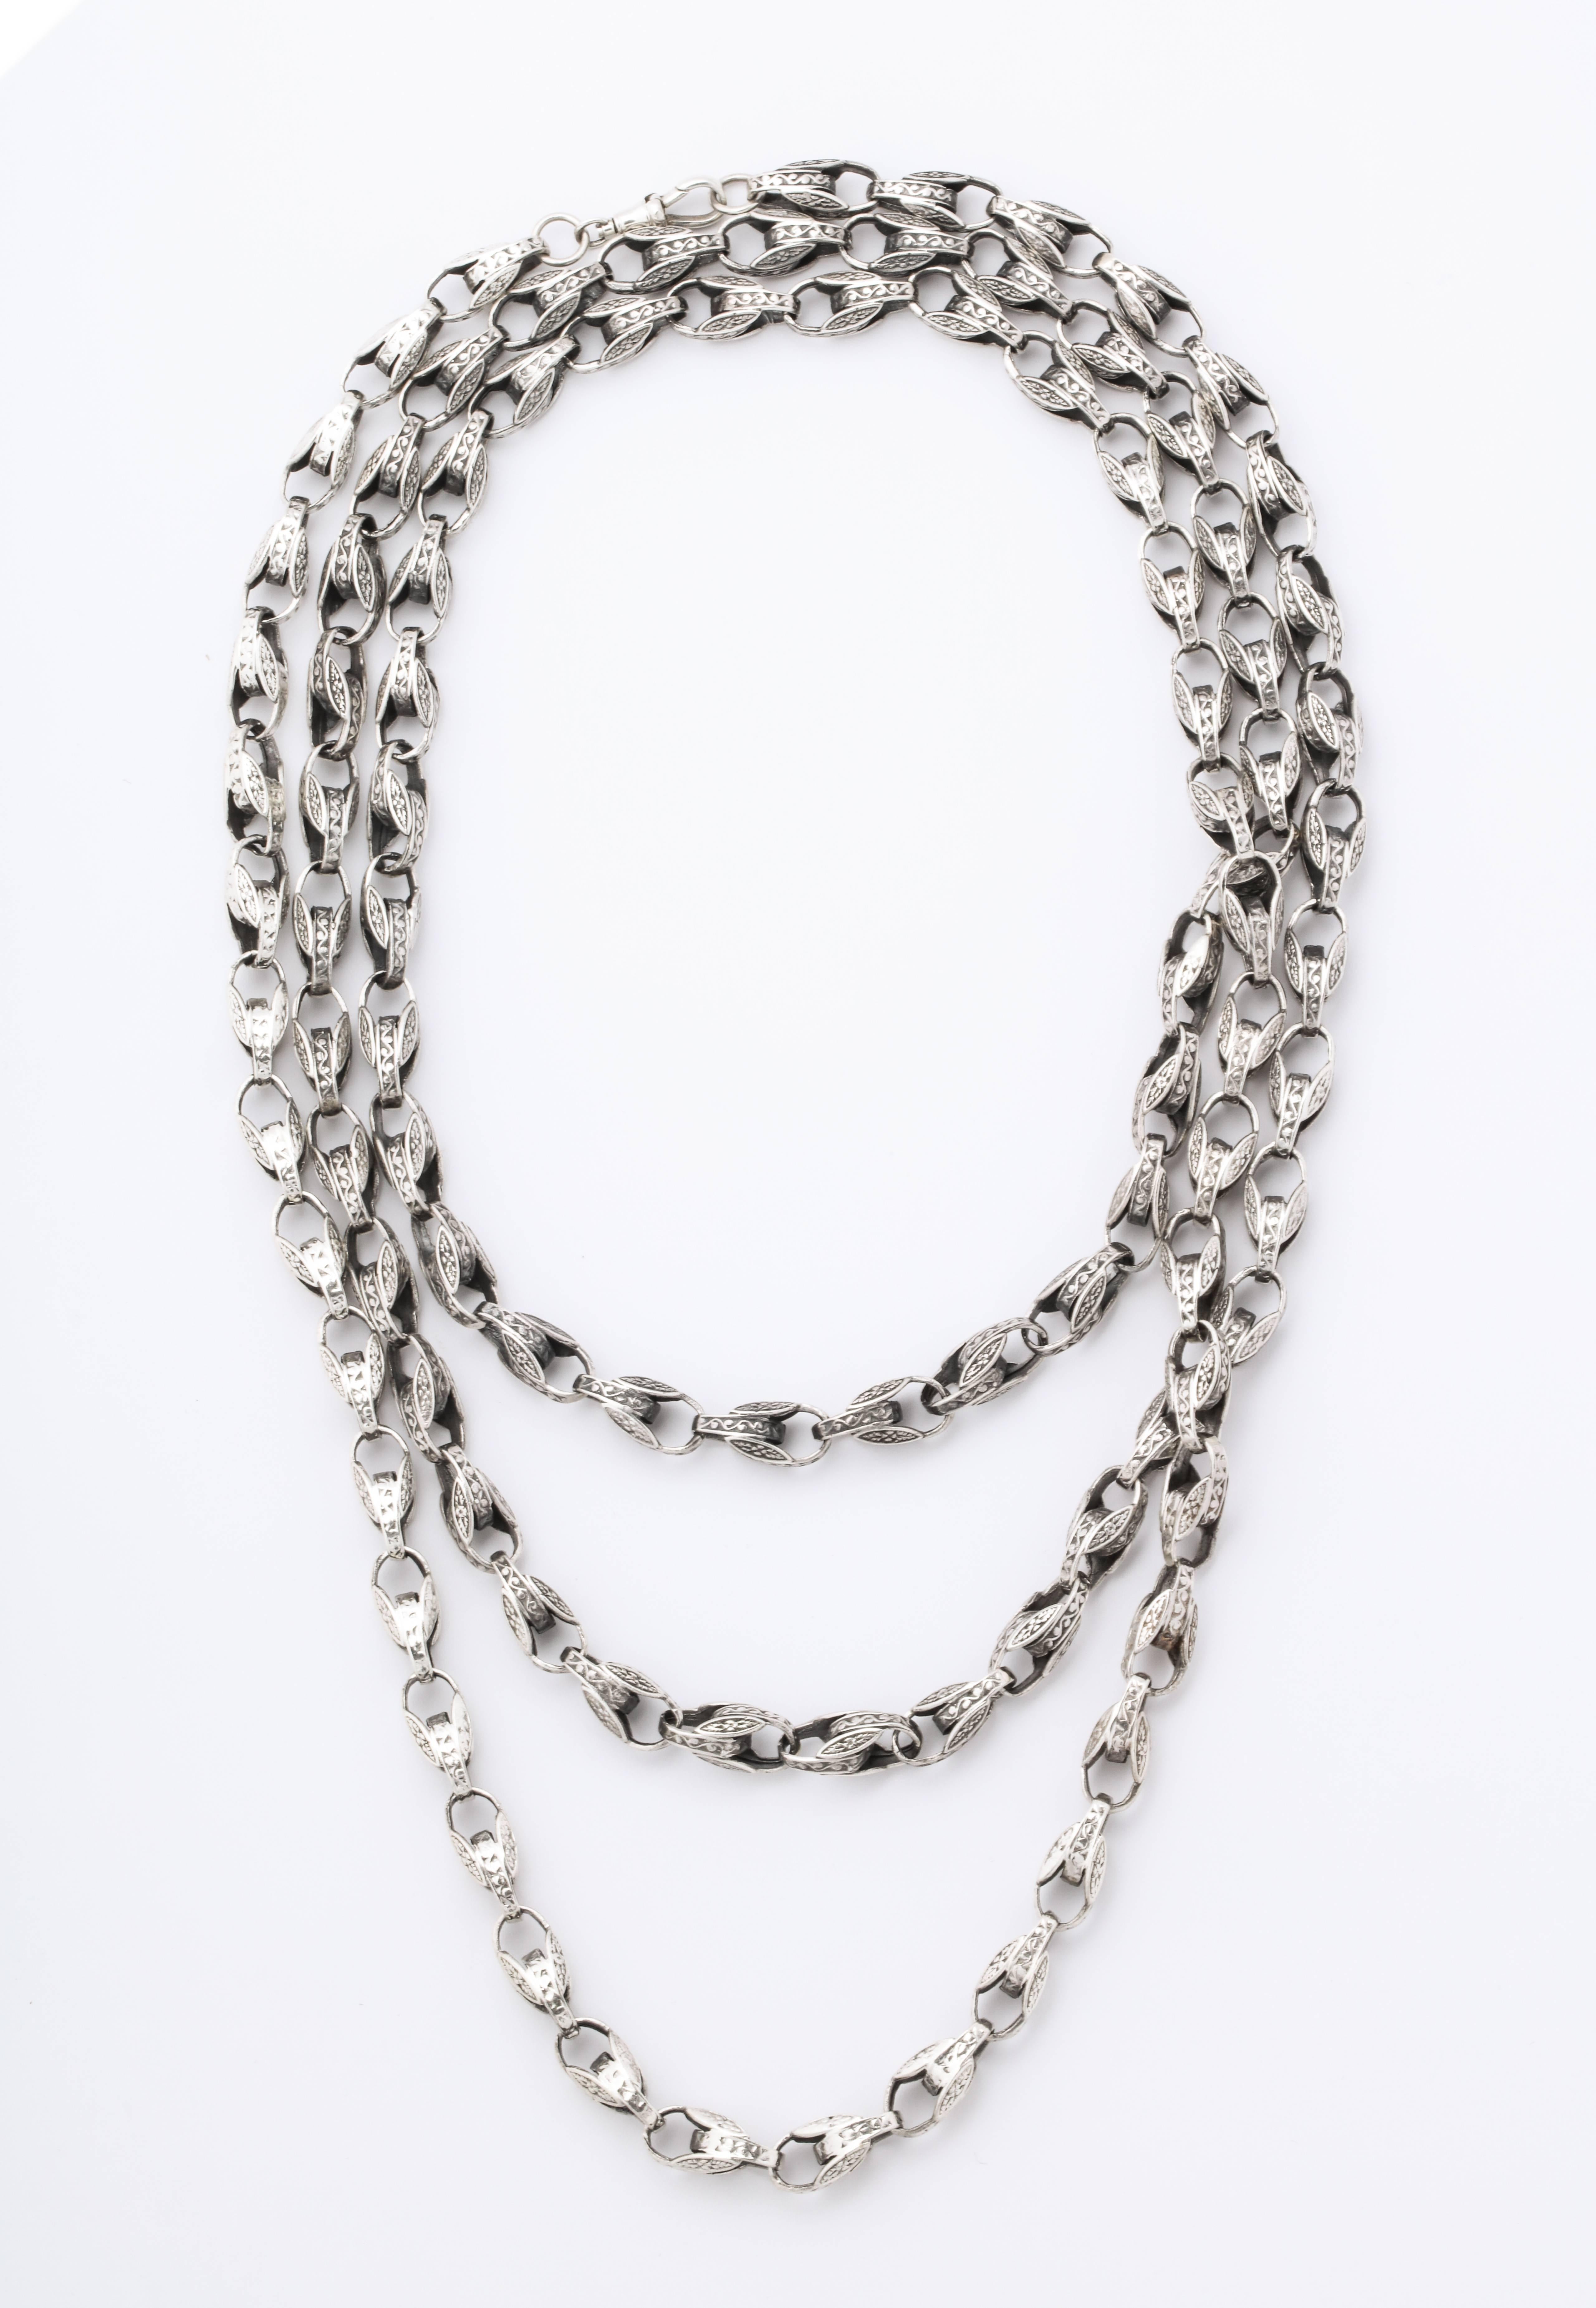 Substantial and eye catching, originating c. 1920-1930, this sterling silver long chain has completely engraved oval links connected in opposite directions. The links are 3/4 of an inch long and the opposing connections are 3/8 inch long. The chain